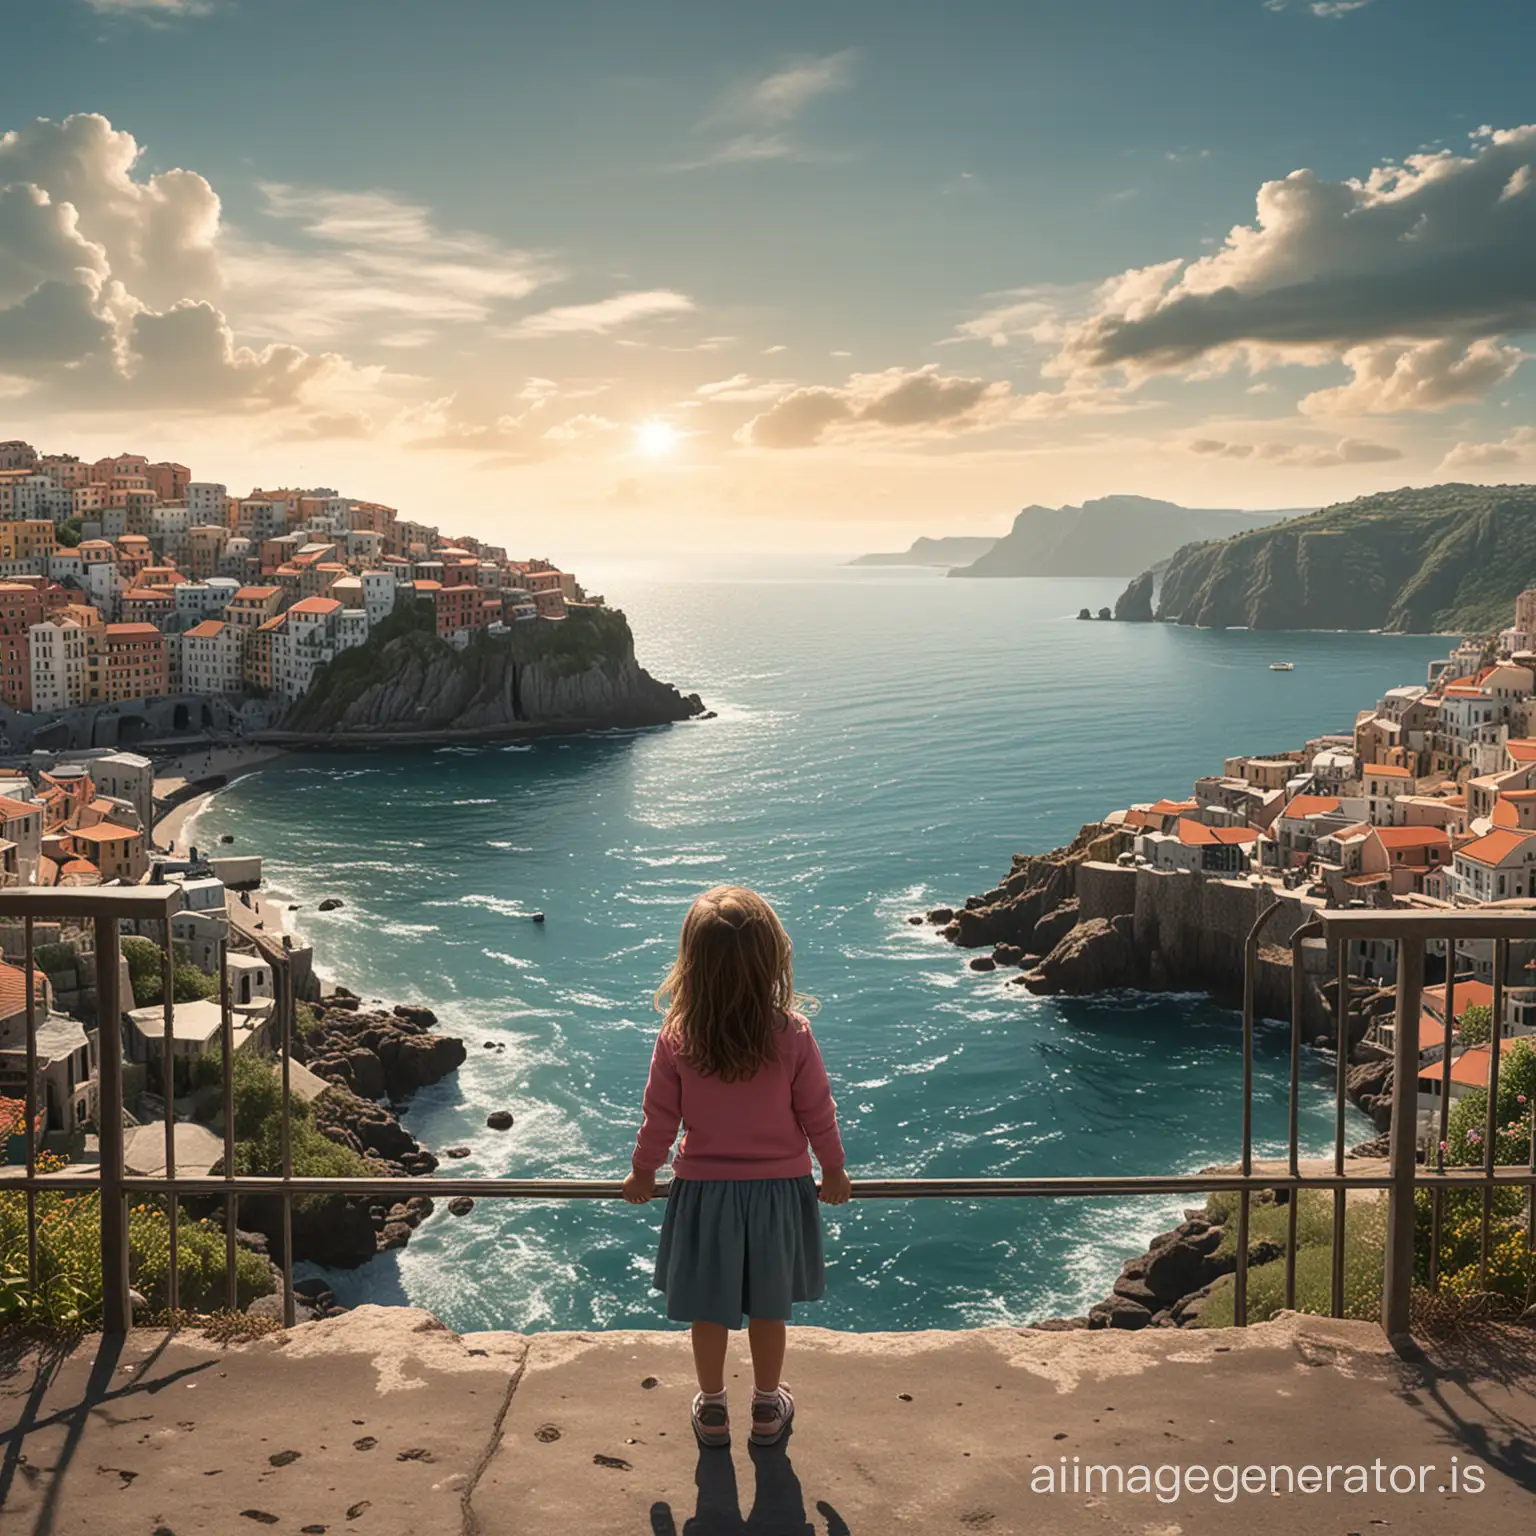 Young-Girl-Enjoying-Seaside-City-View-with-Distant-Isle